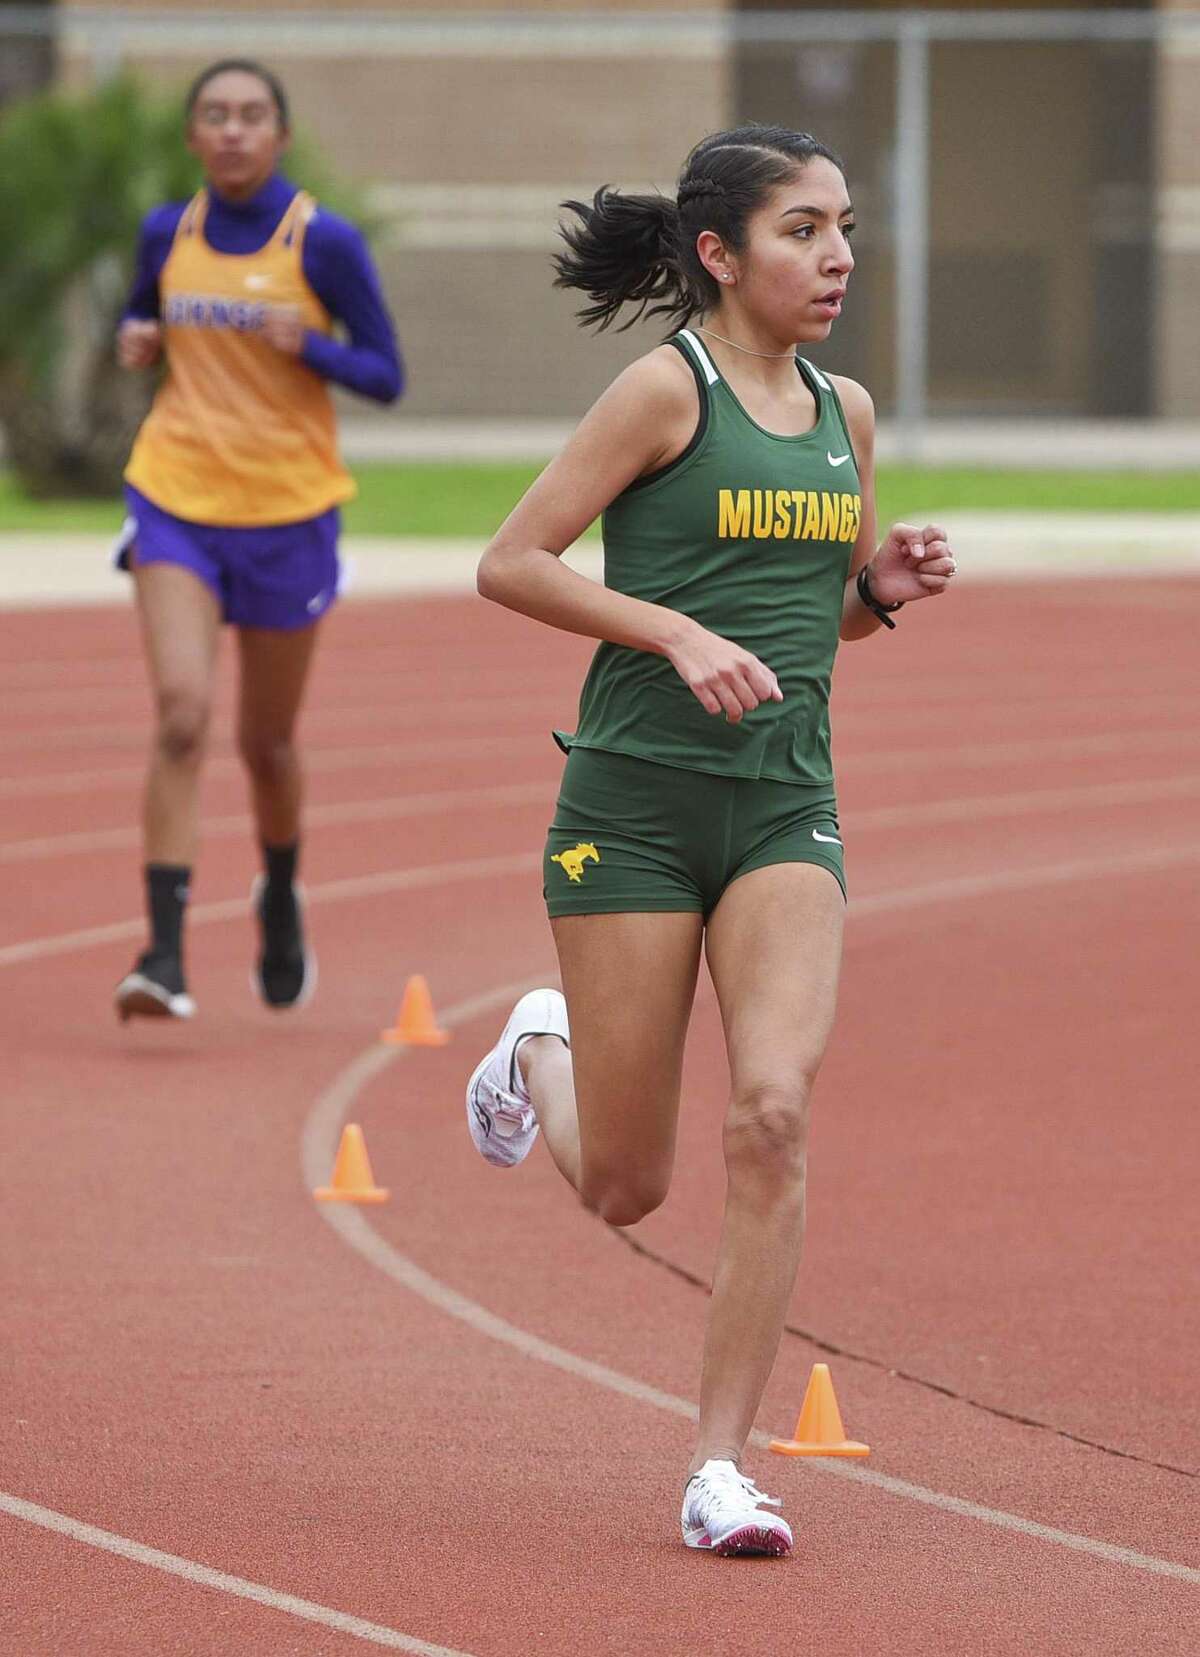 At the District 29/30-6A area meet Thursday at Shirley Field, Nixon’s Alexa Rodriguez won the area titles in the 3,200- and 1,600-meter runs while United’s D’Carlo Calderon won golds in the 100-meter dash and 300-meter hurdles. Martin’s Miguel Escamilla also took second place at the 29/30-5A area meet in Alice Wednesday.